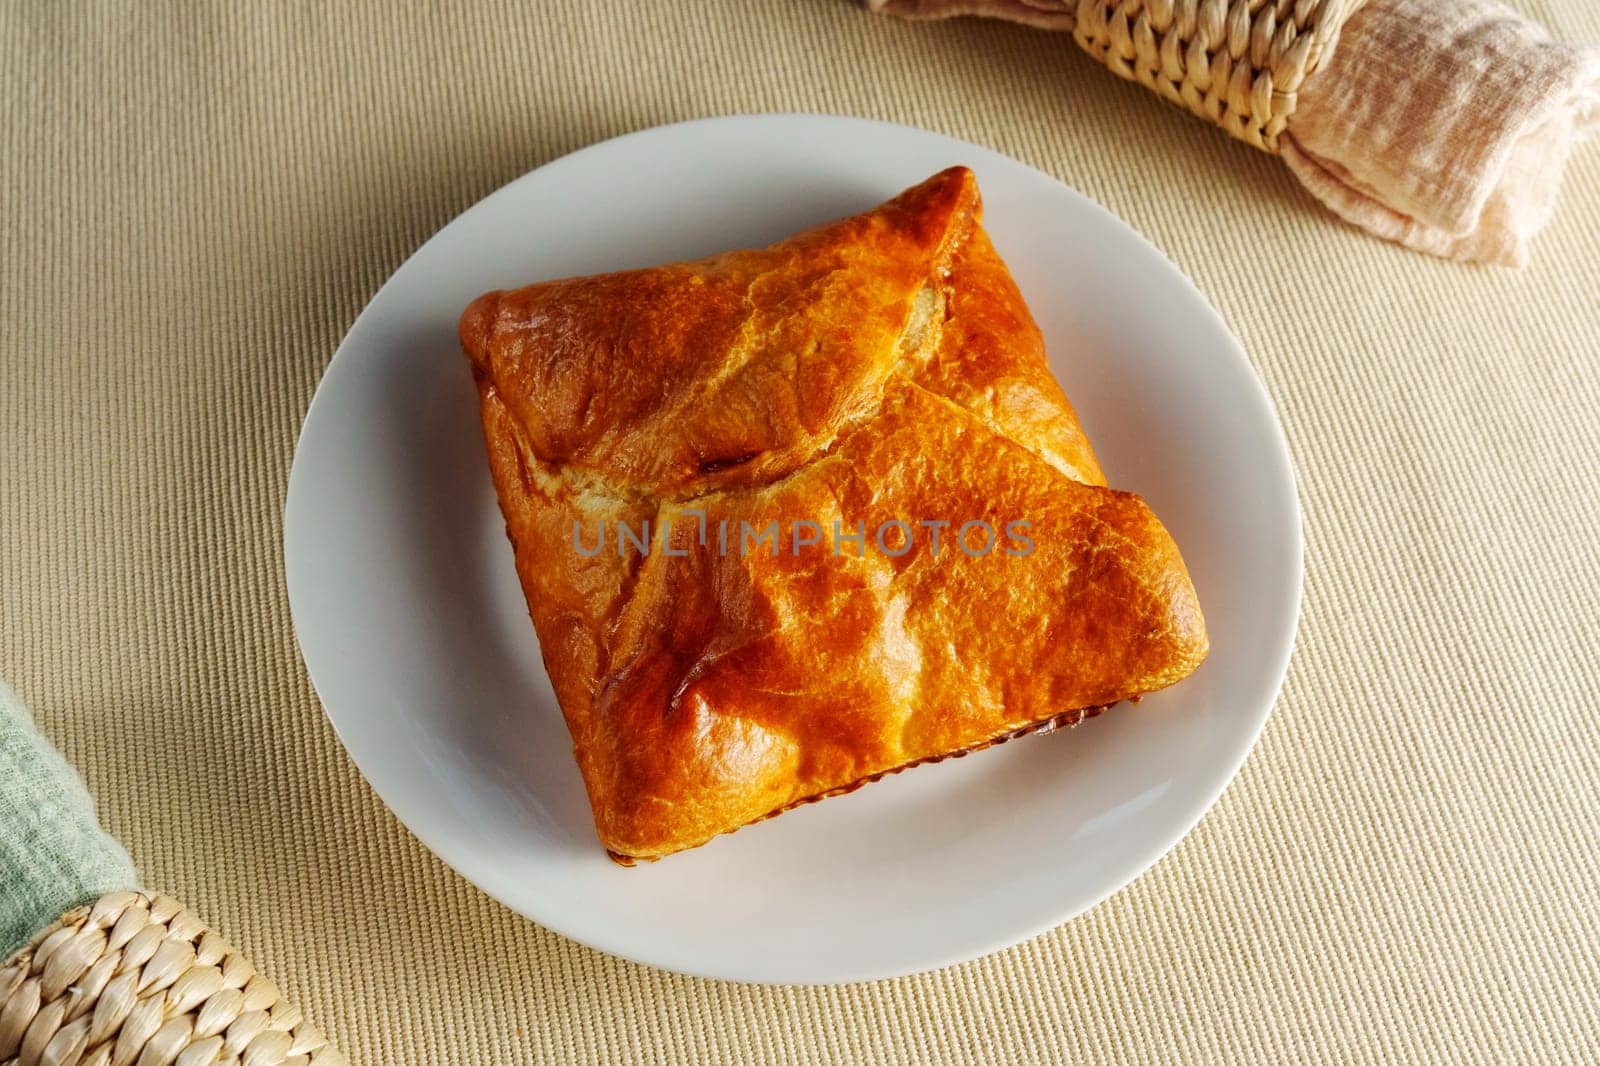 Delicate Delights: A Flaky Puff Pastry Placed Elegantly on a Gleaming White Plate by darksoul72